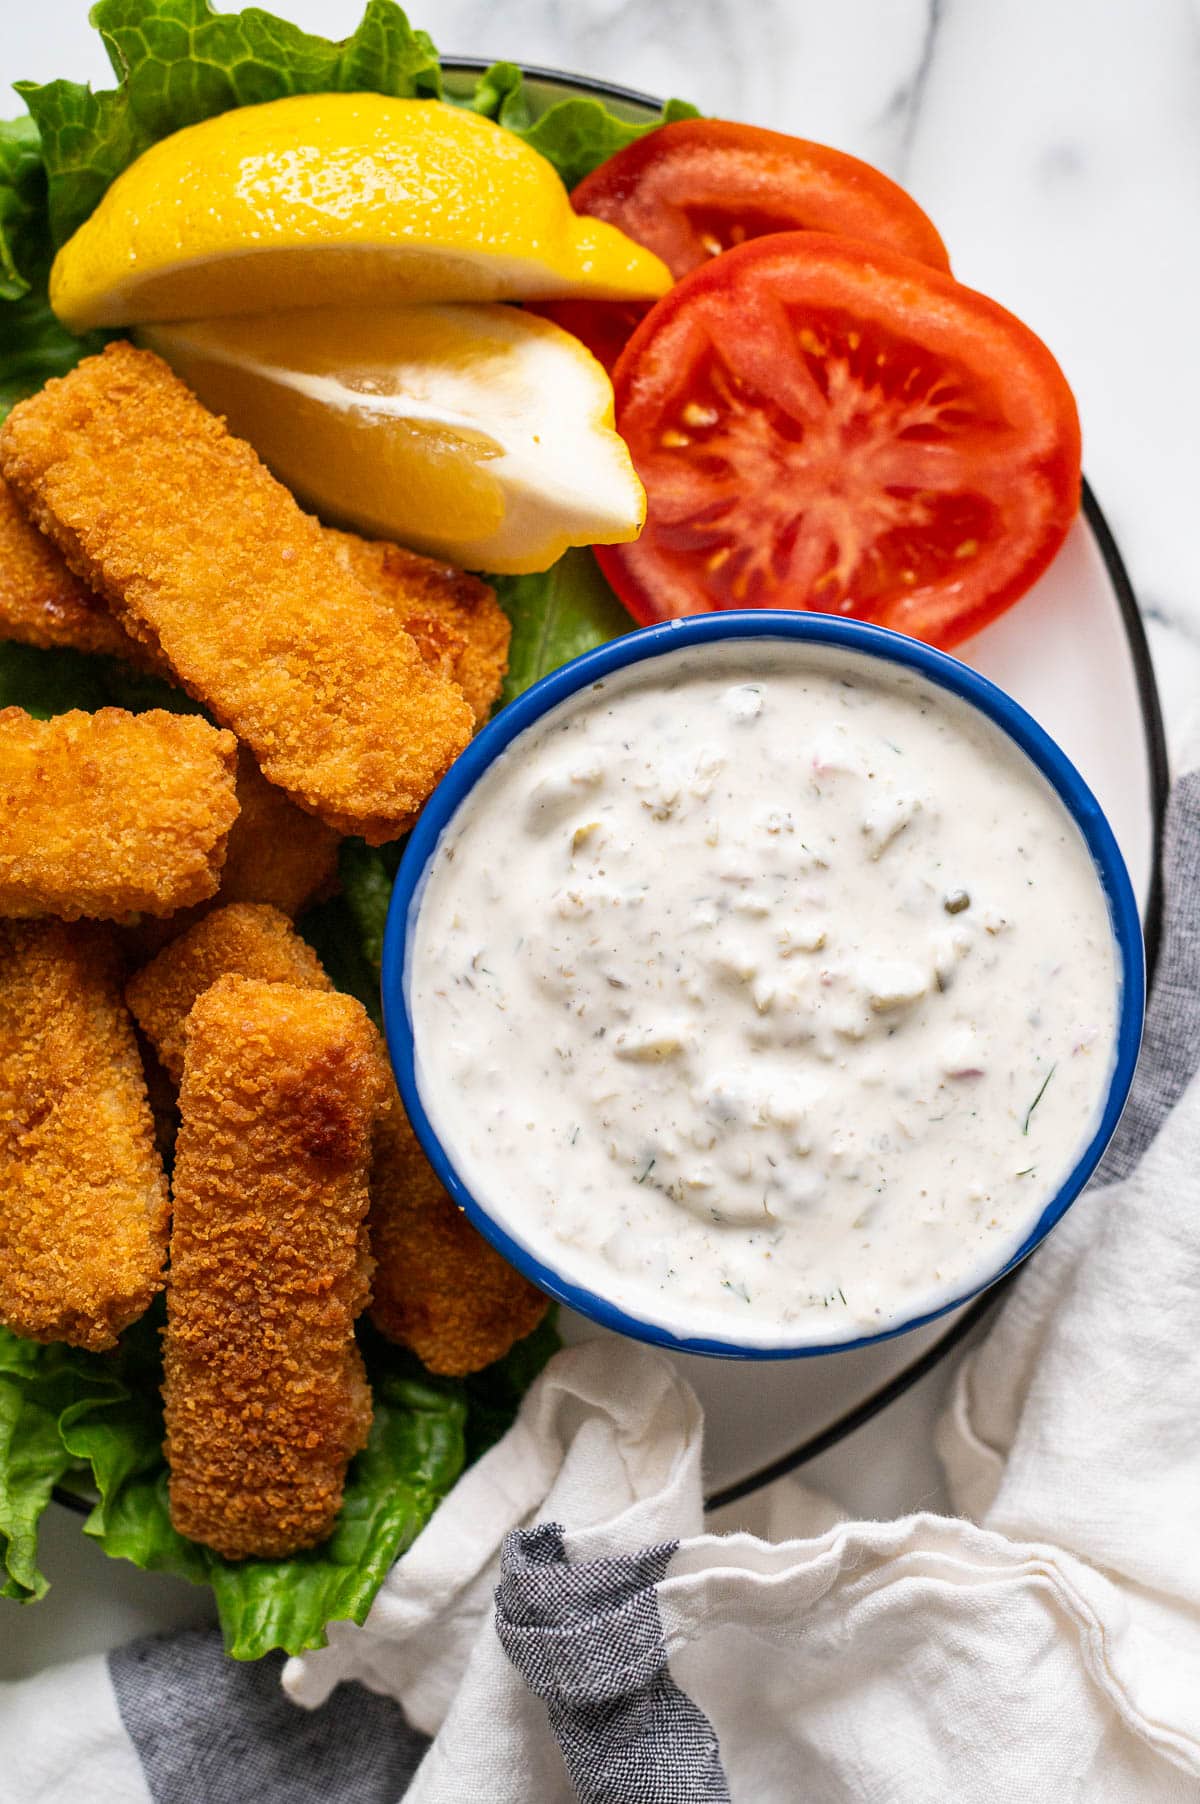 Tartar sauce in a bowl. Fish sticks, lemon wedges and tomato slices on a plate.